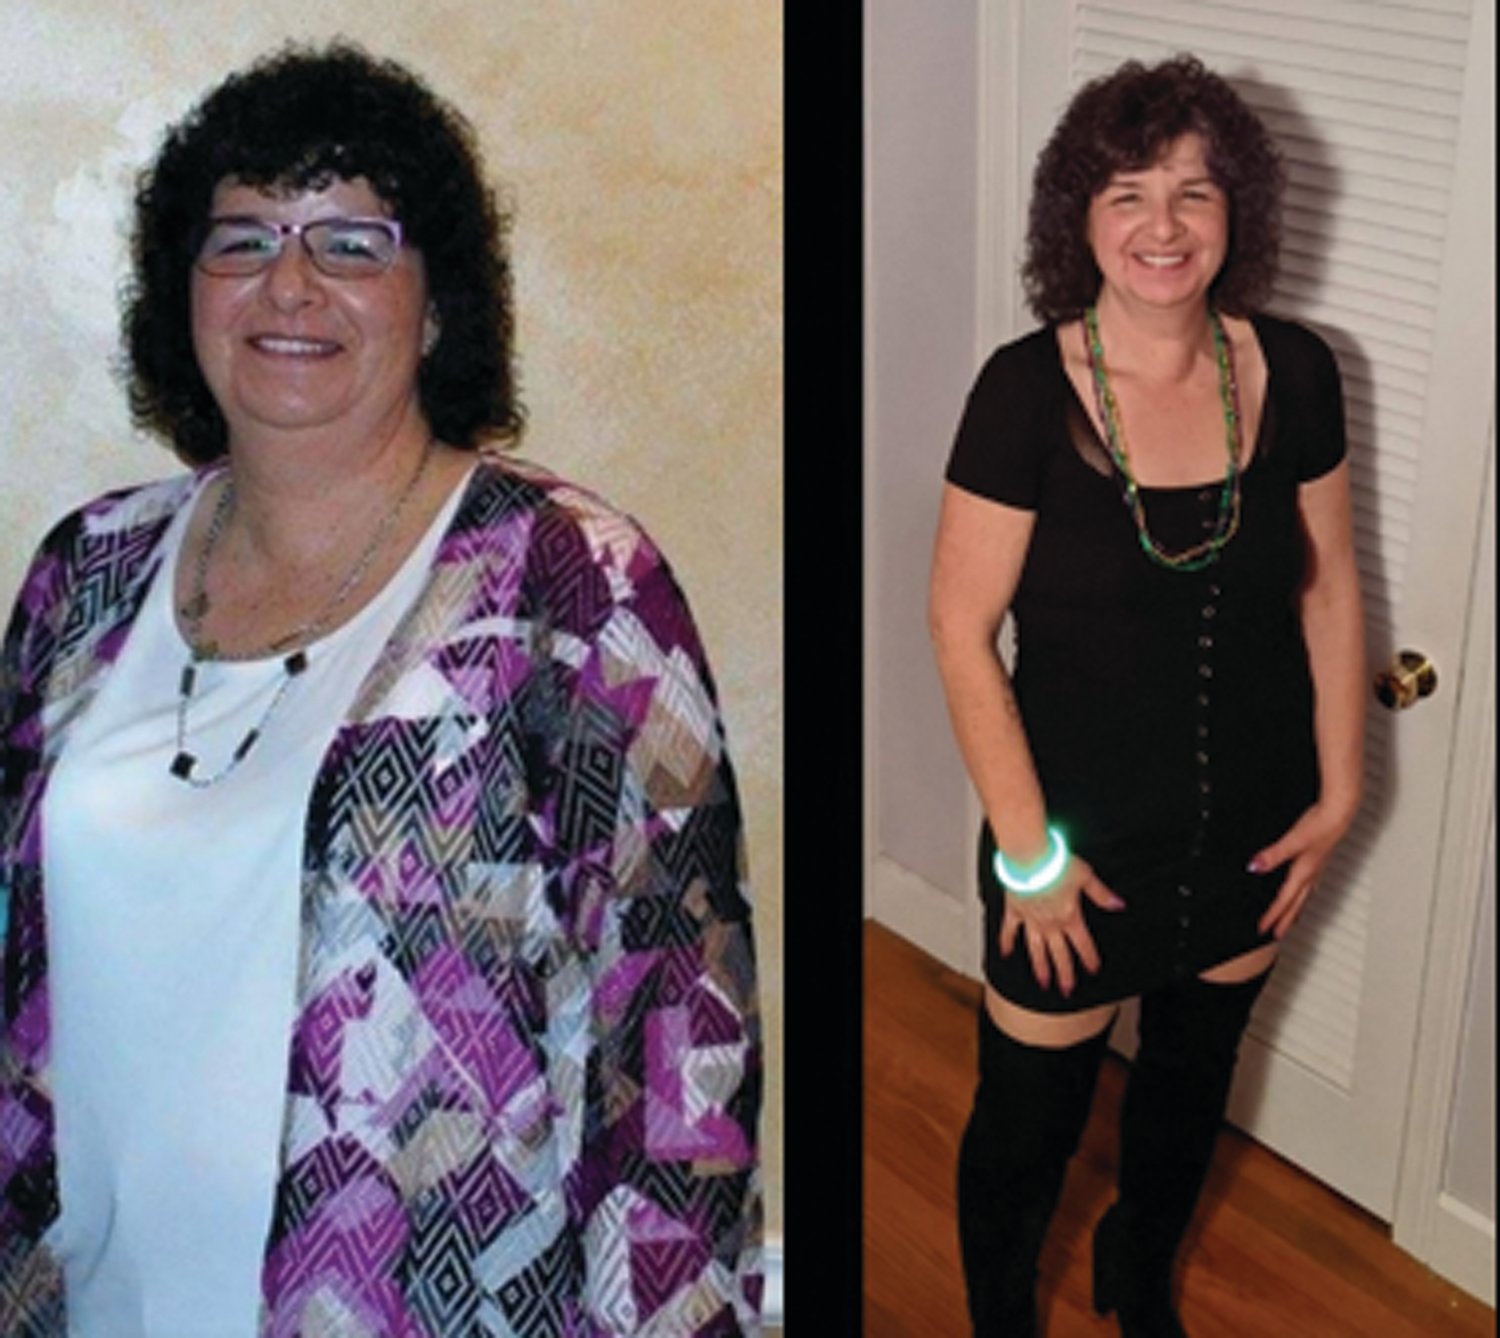 Amy Bernard, seen in these before and after pictures, is the 2019 Queen of Oakland Beach Chapter 44 of Taking Off Pounds Sensibly, or TOPS.